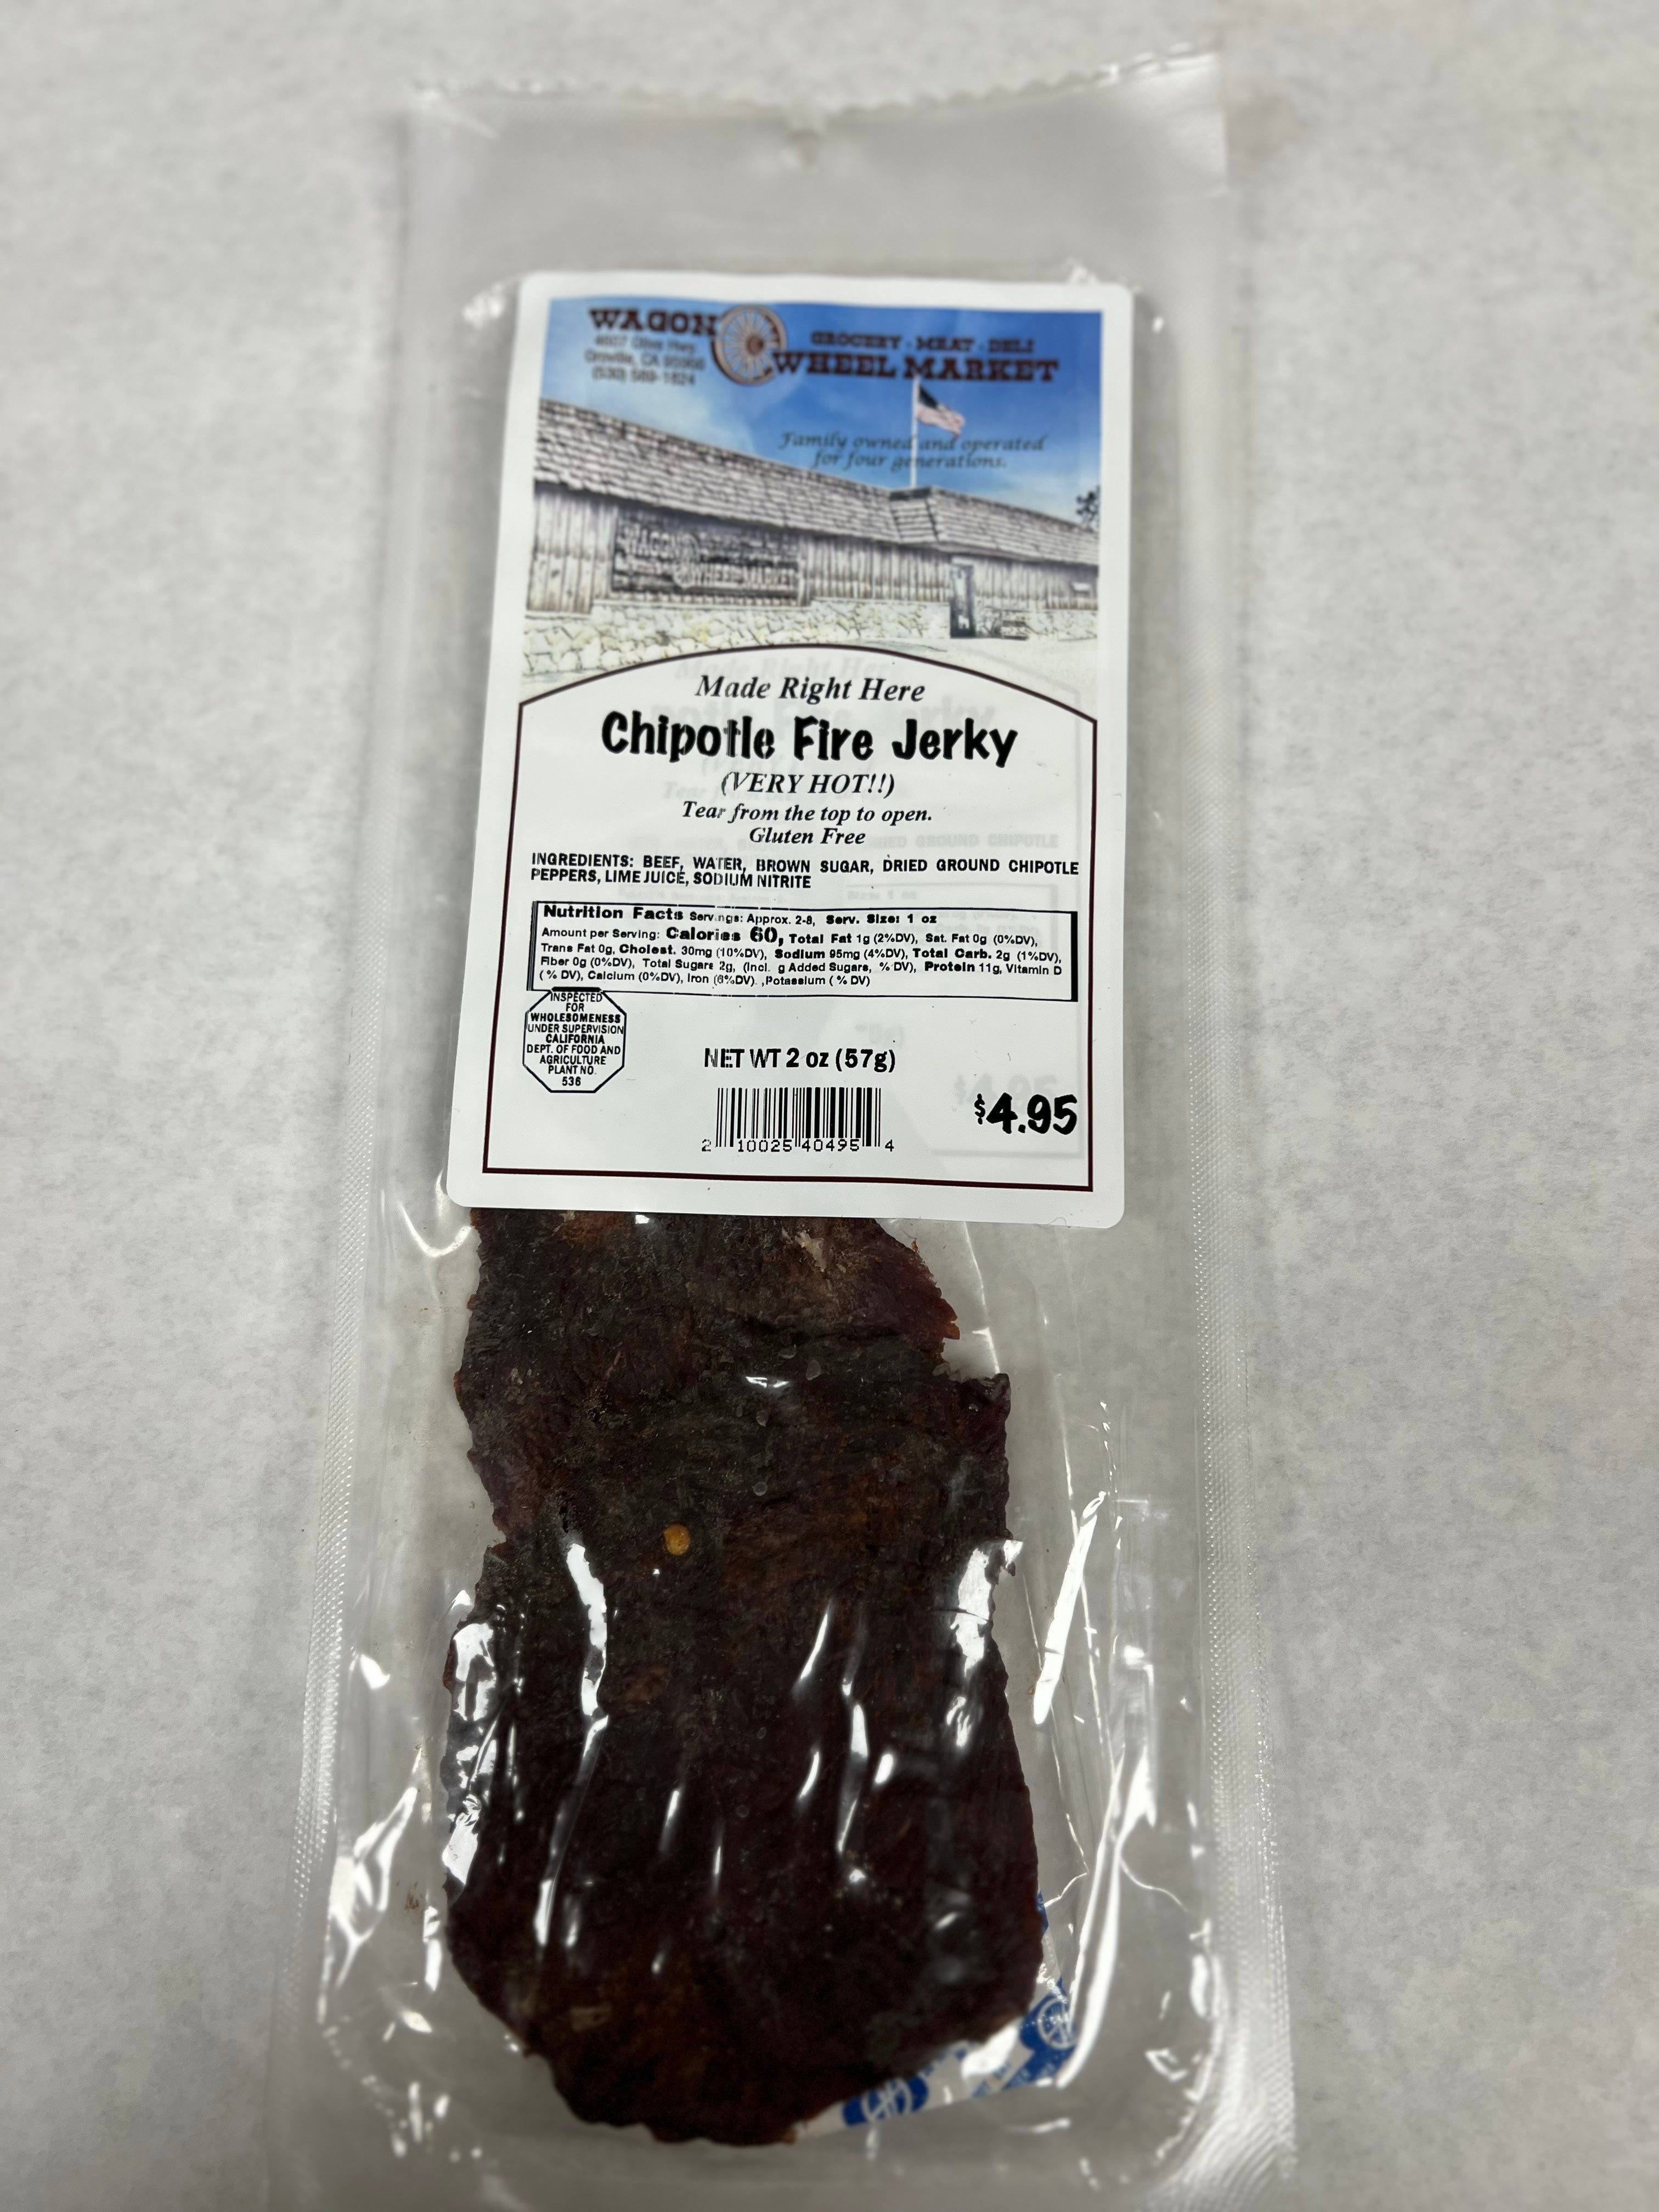 Chipotle Fire Jerky